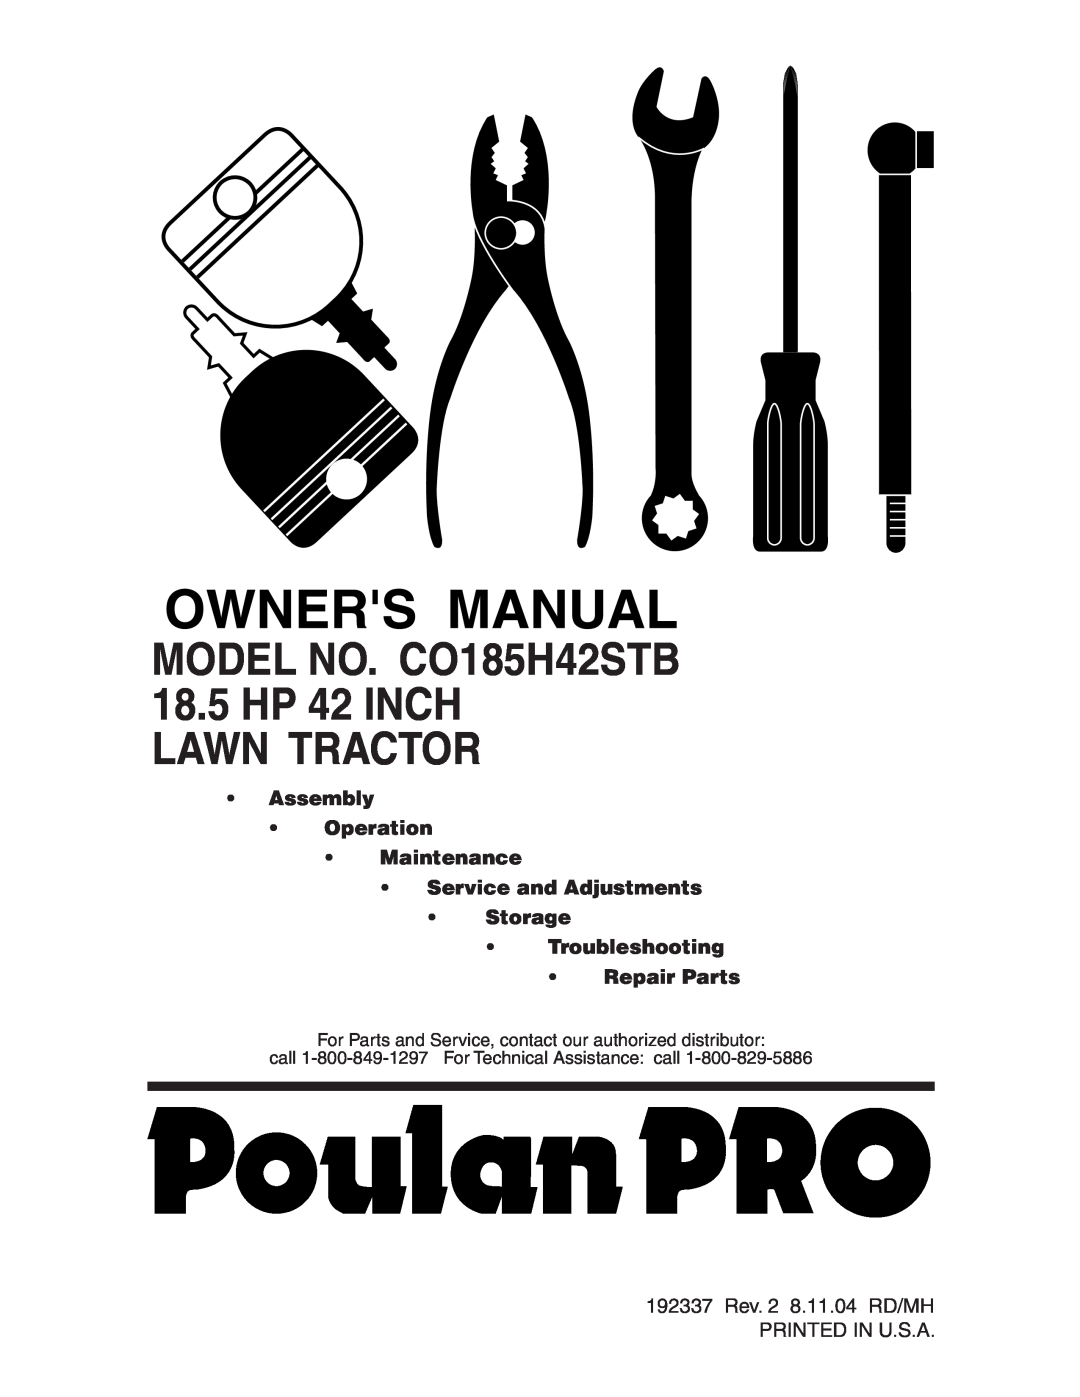 Poulan manual MODEL NO. CO185H42STB, 18.5HP 42 INCH LAWN TRACTOR, Assembly Operation Maintenance 